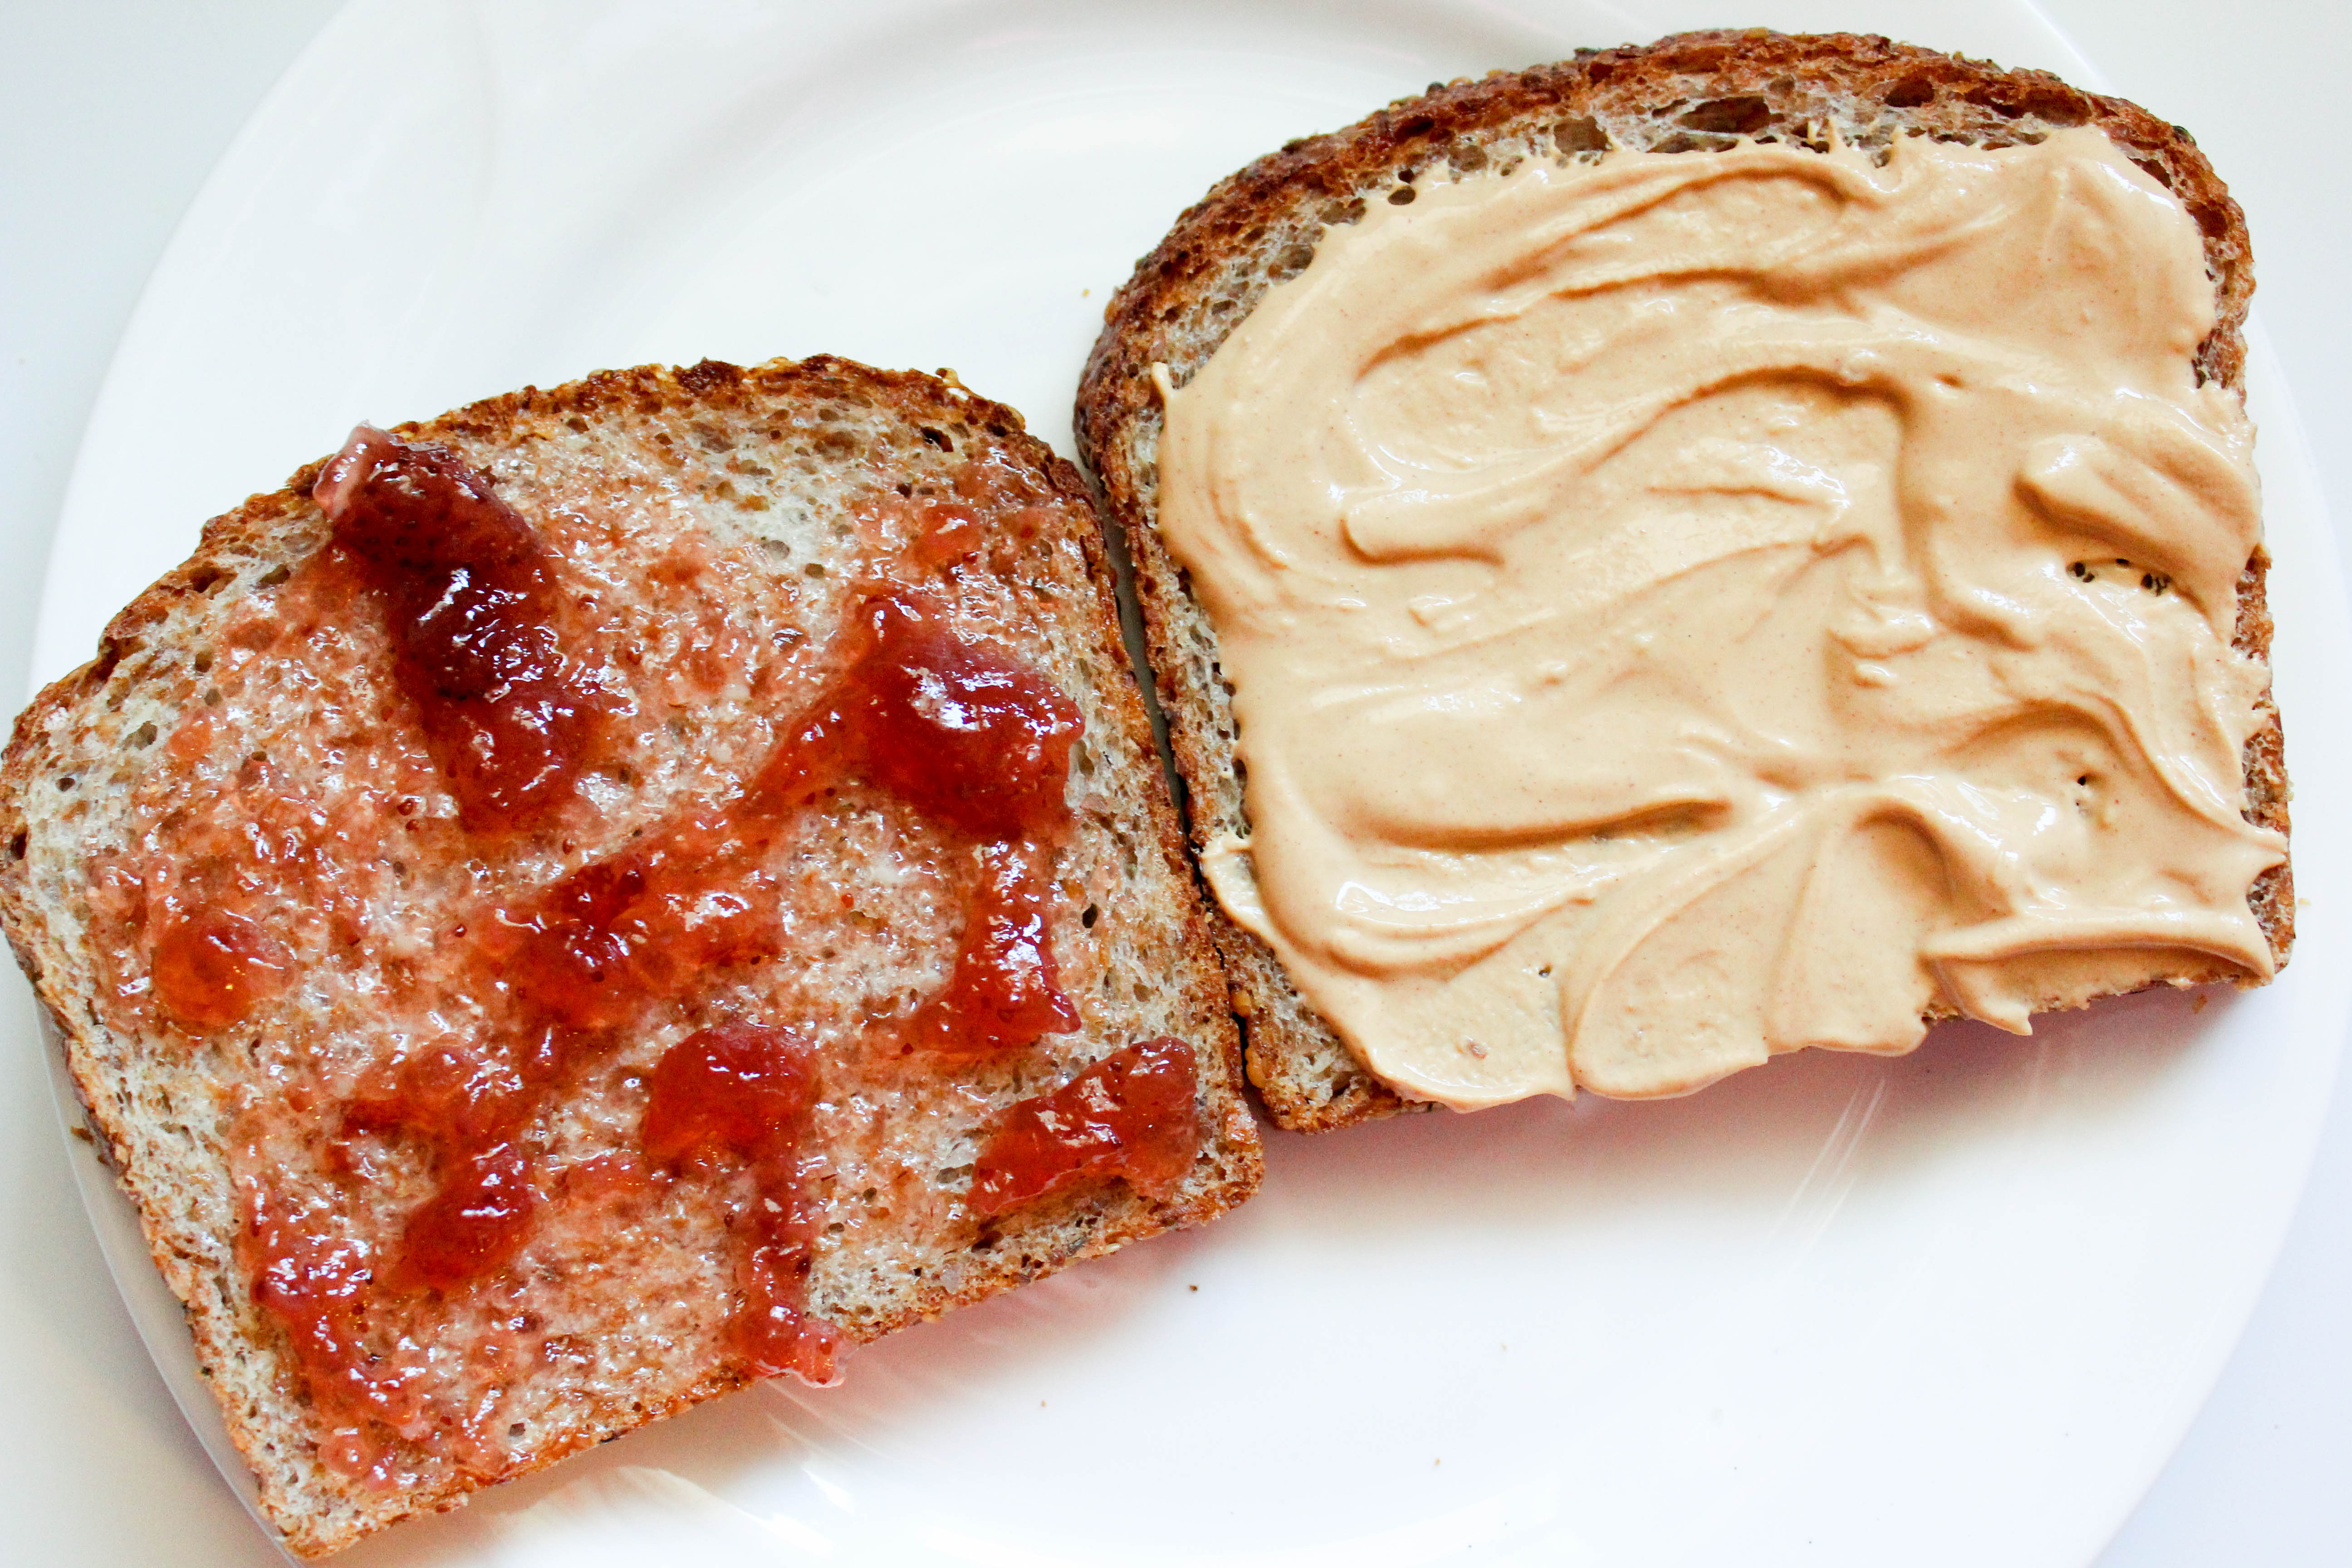 Grilled Peanut Butter and Jelly Sandwich (THM-E, Low Fat)